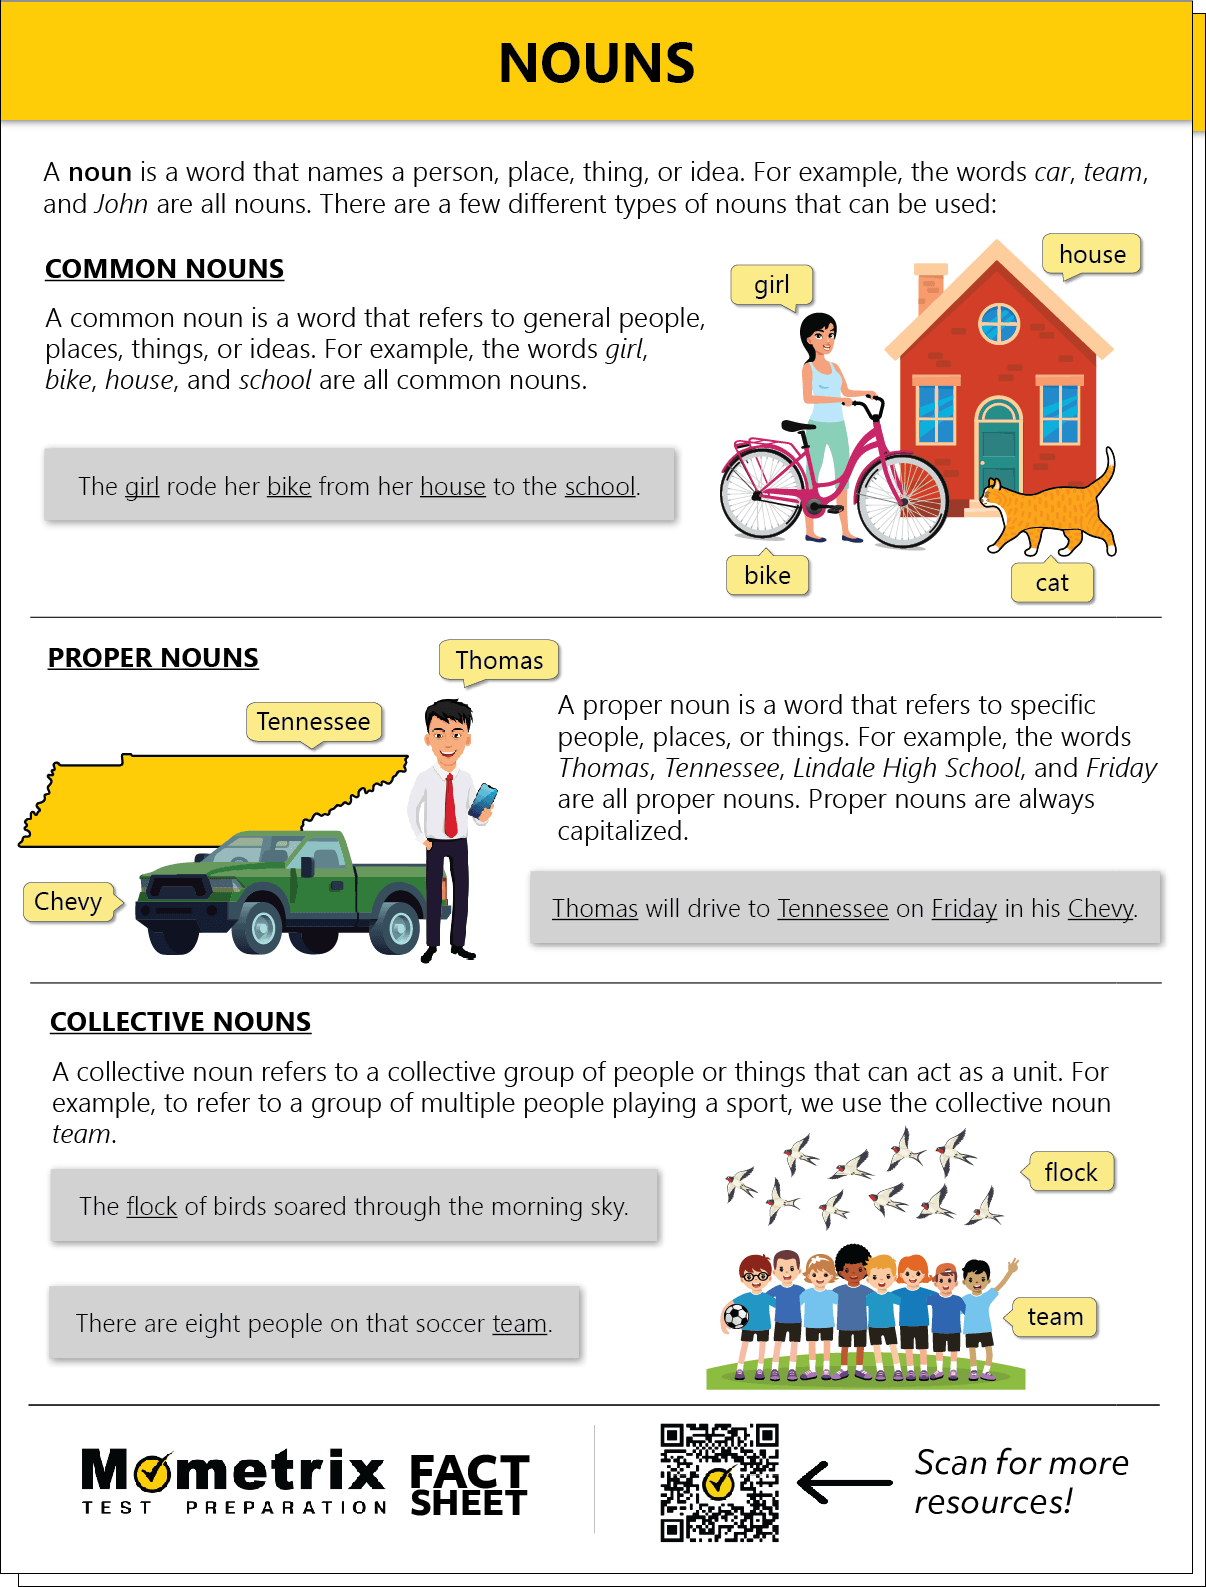 An infographic explaining different types of nouns: common nouns (girl, school), proper nouns (Thomas, Tennessee), and collective nouns (flock, team). Illustrations accompany examples.